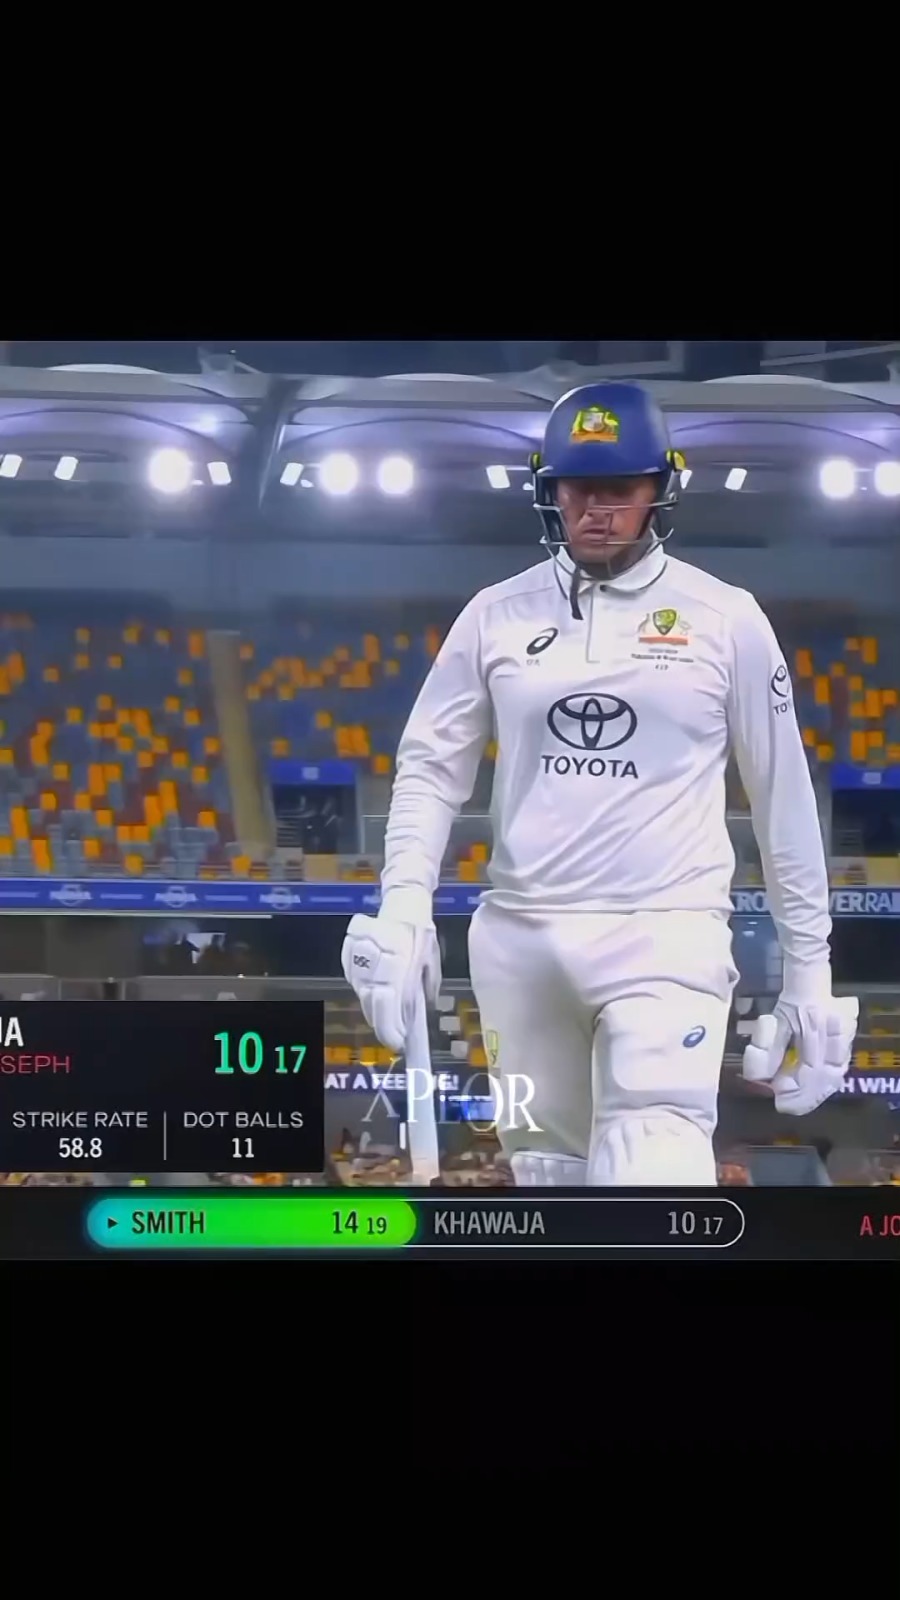 AUS LOST BUT STILL A GOAT INNING FROM MASTER OF TEST CRICKET